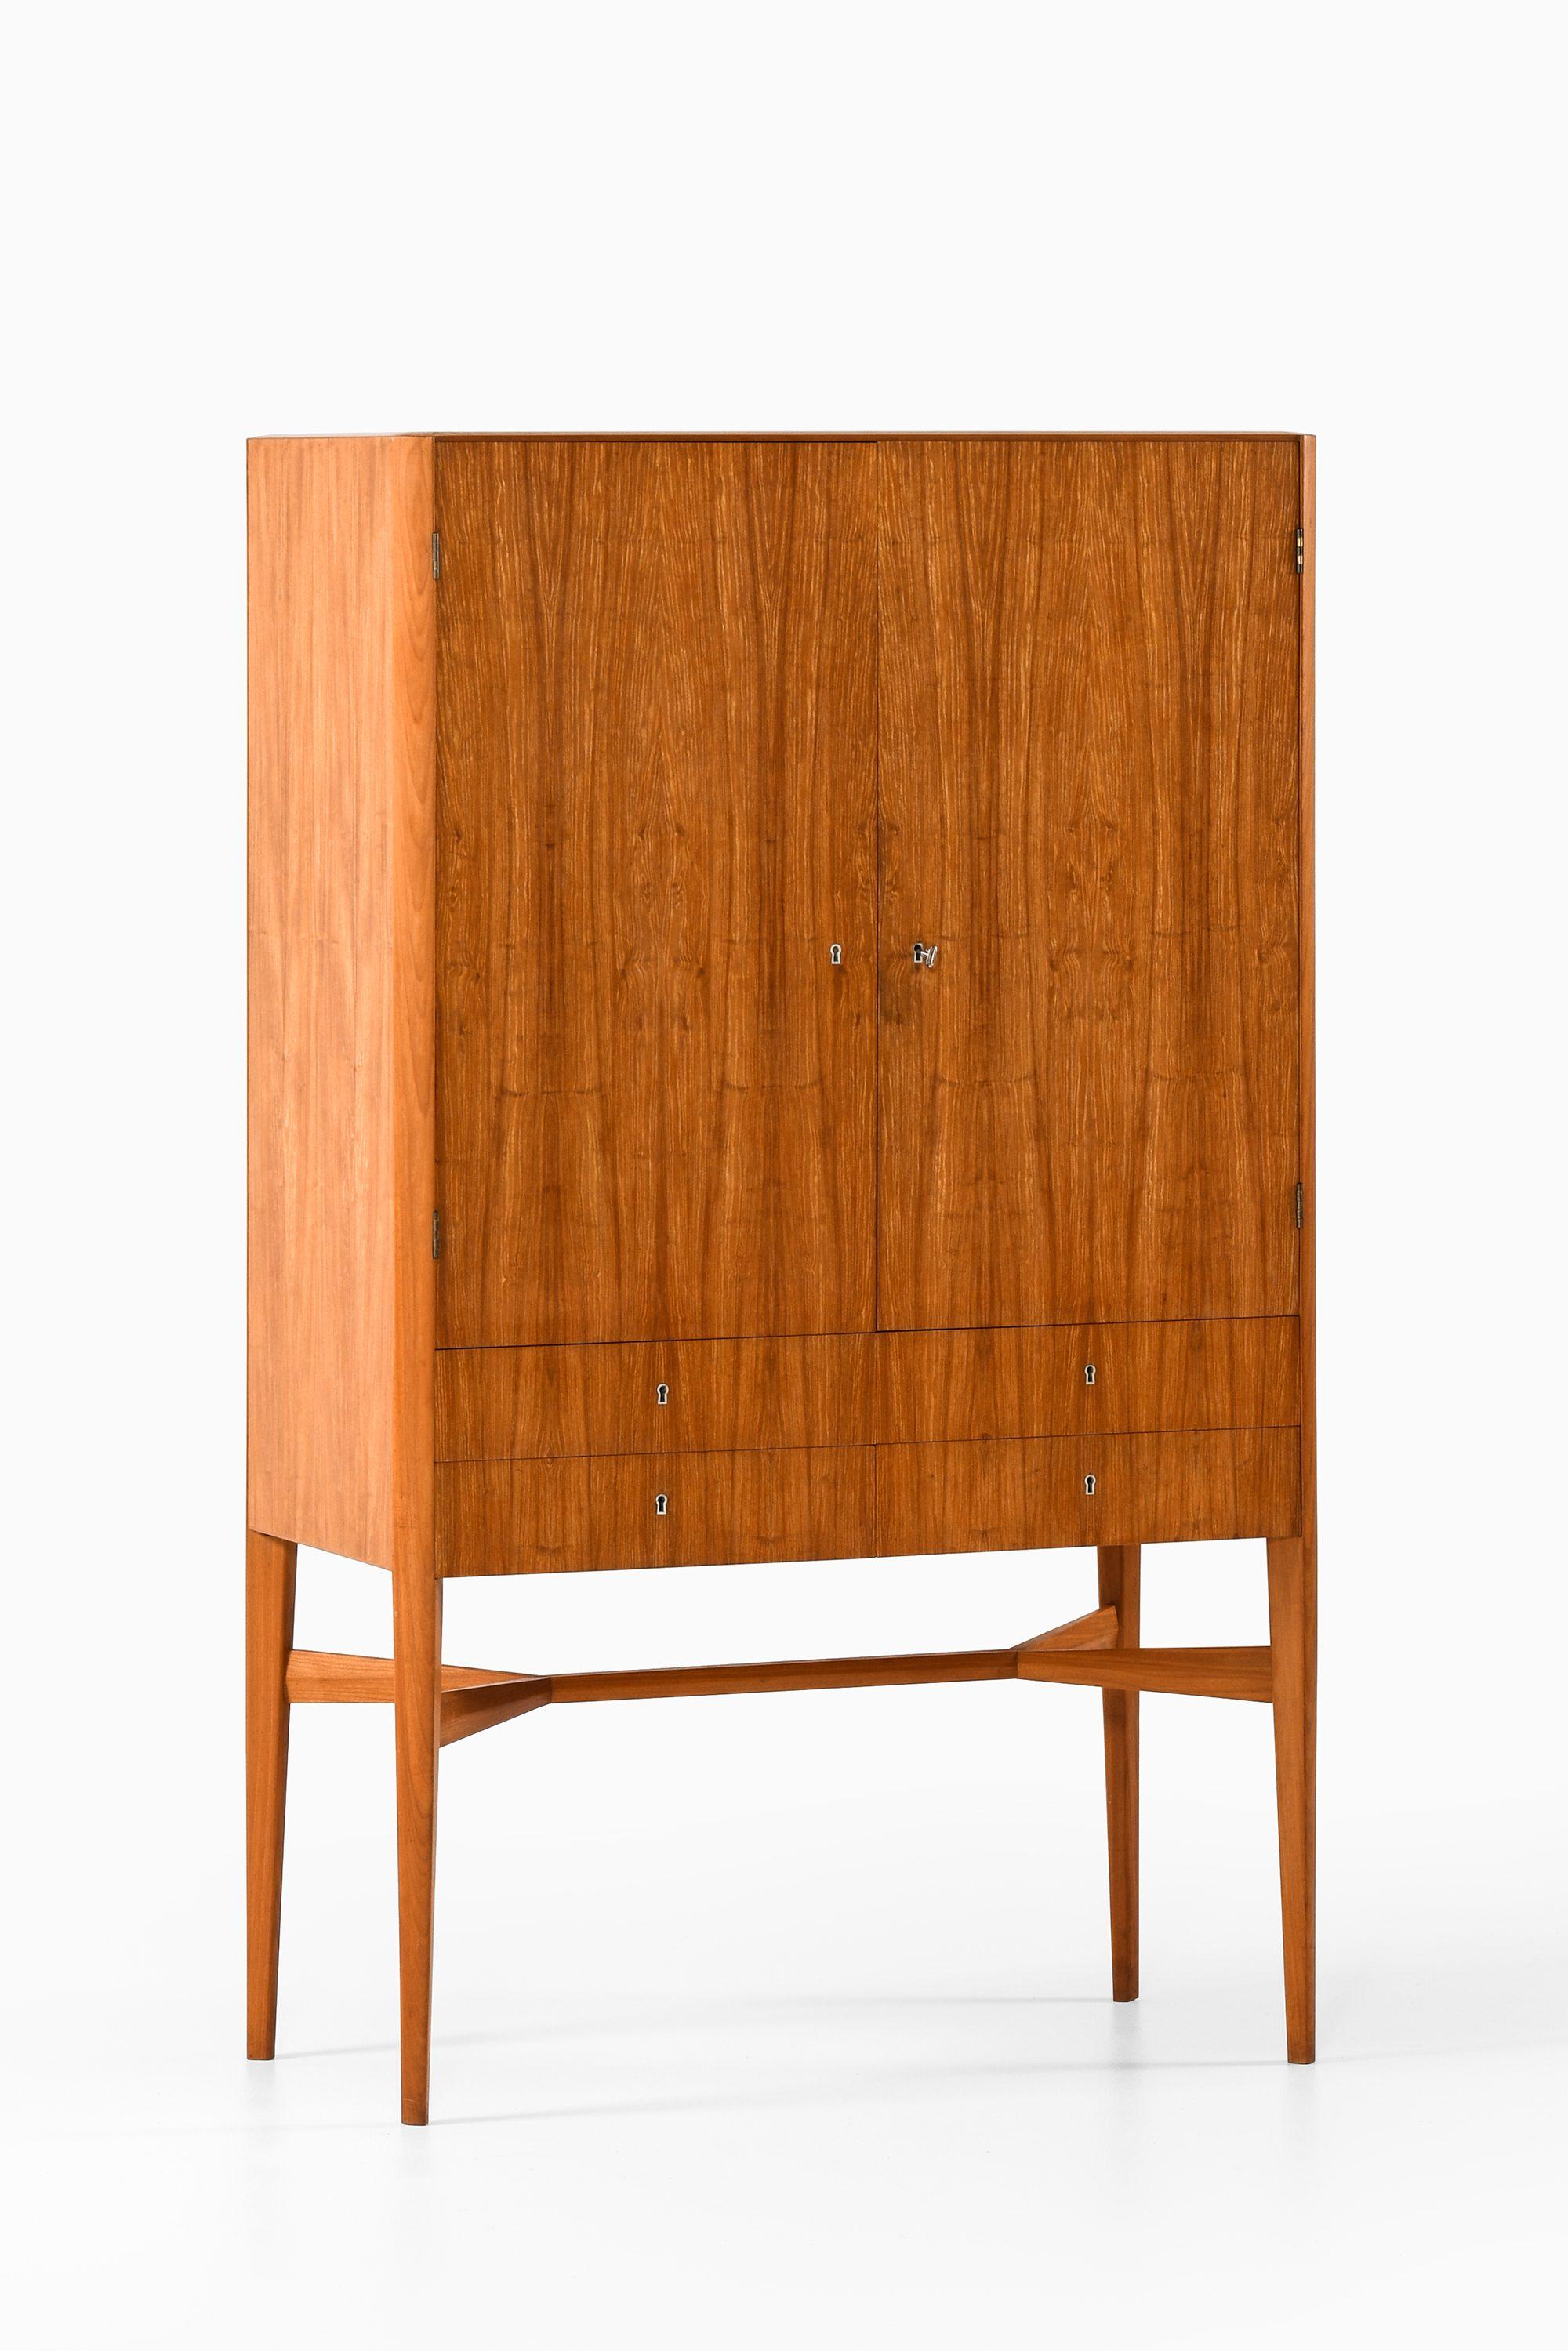 Freestanding Cabinet in Teak by Carl-Axel Acking, 1940s

Additional Information:
Material: Teak
Style: midcentury, Scandinavian
Produced in Sweden
Dimensions (W x D x H): 89.5 x 42.5 x 147.5 cm
Condition: Good vintage condition, with signs of